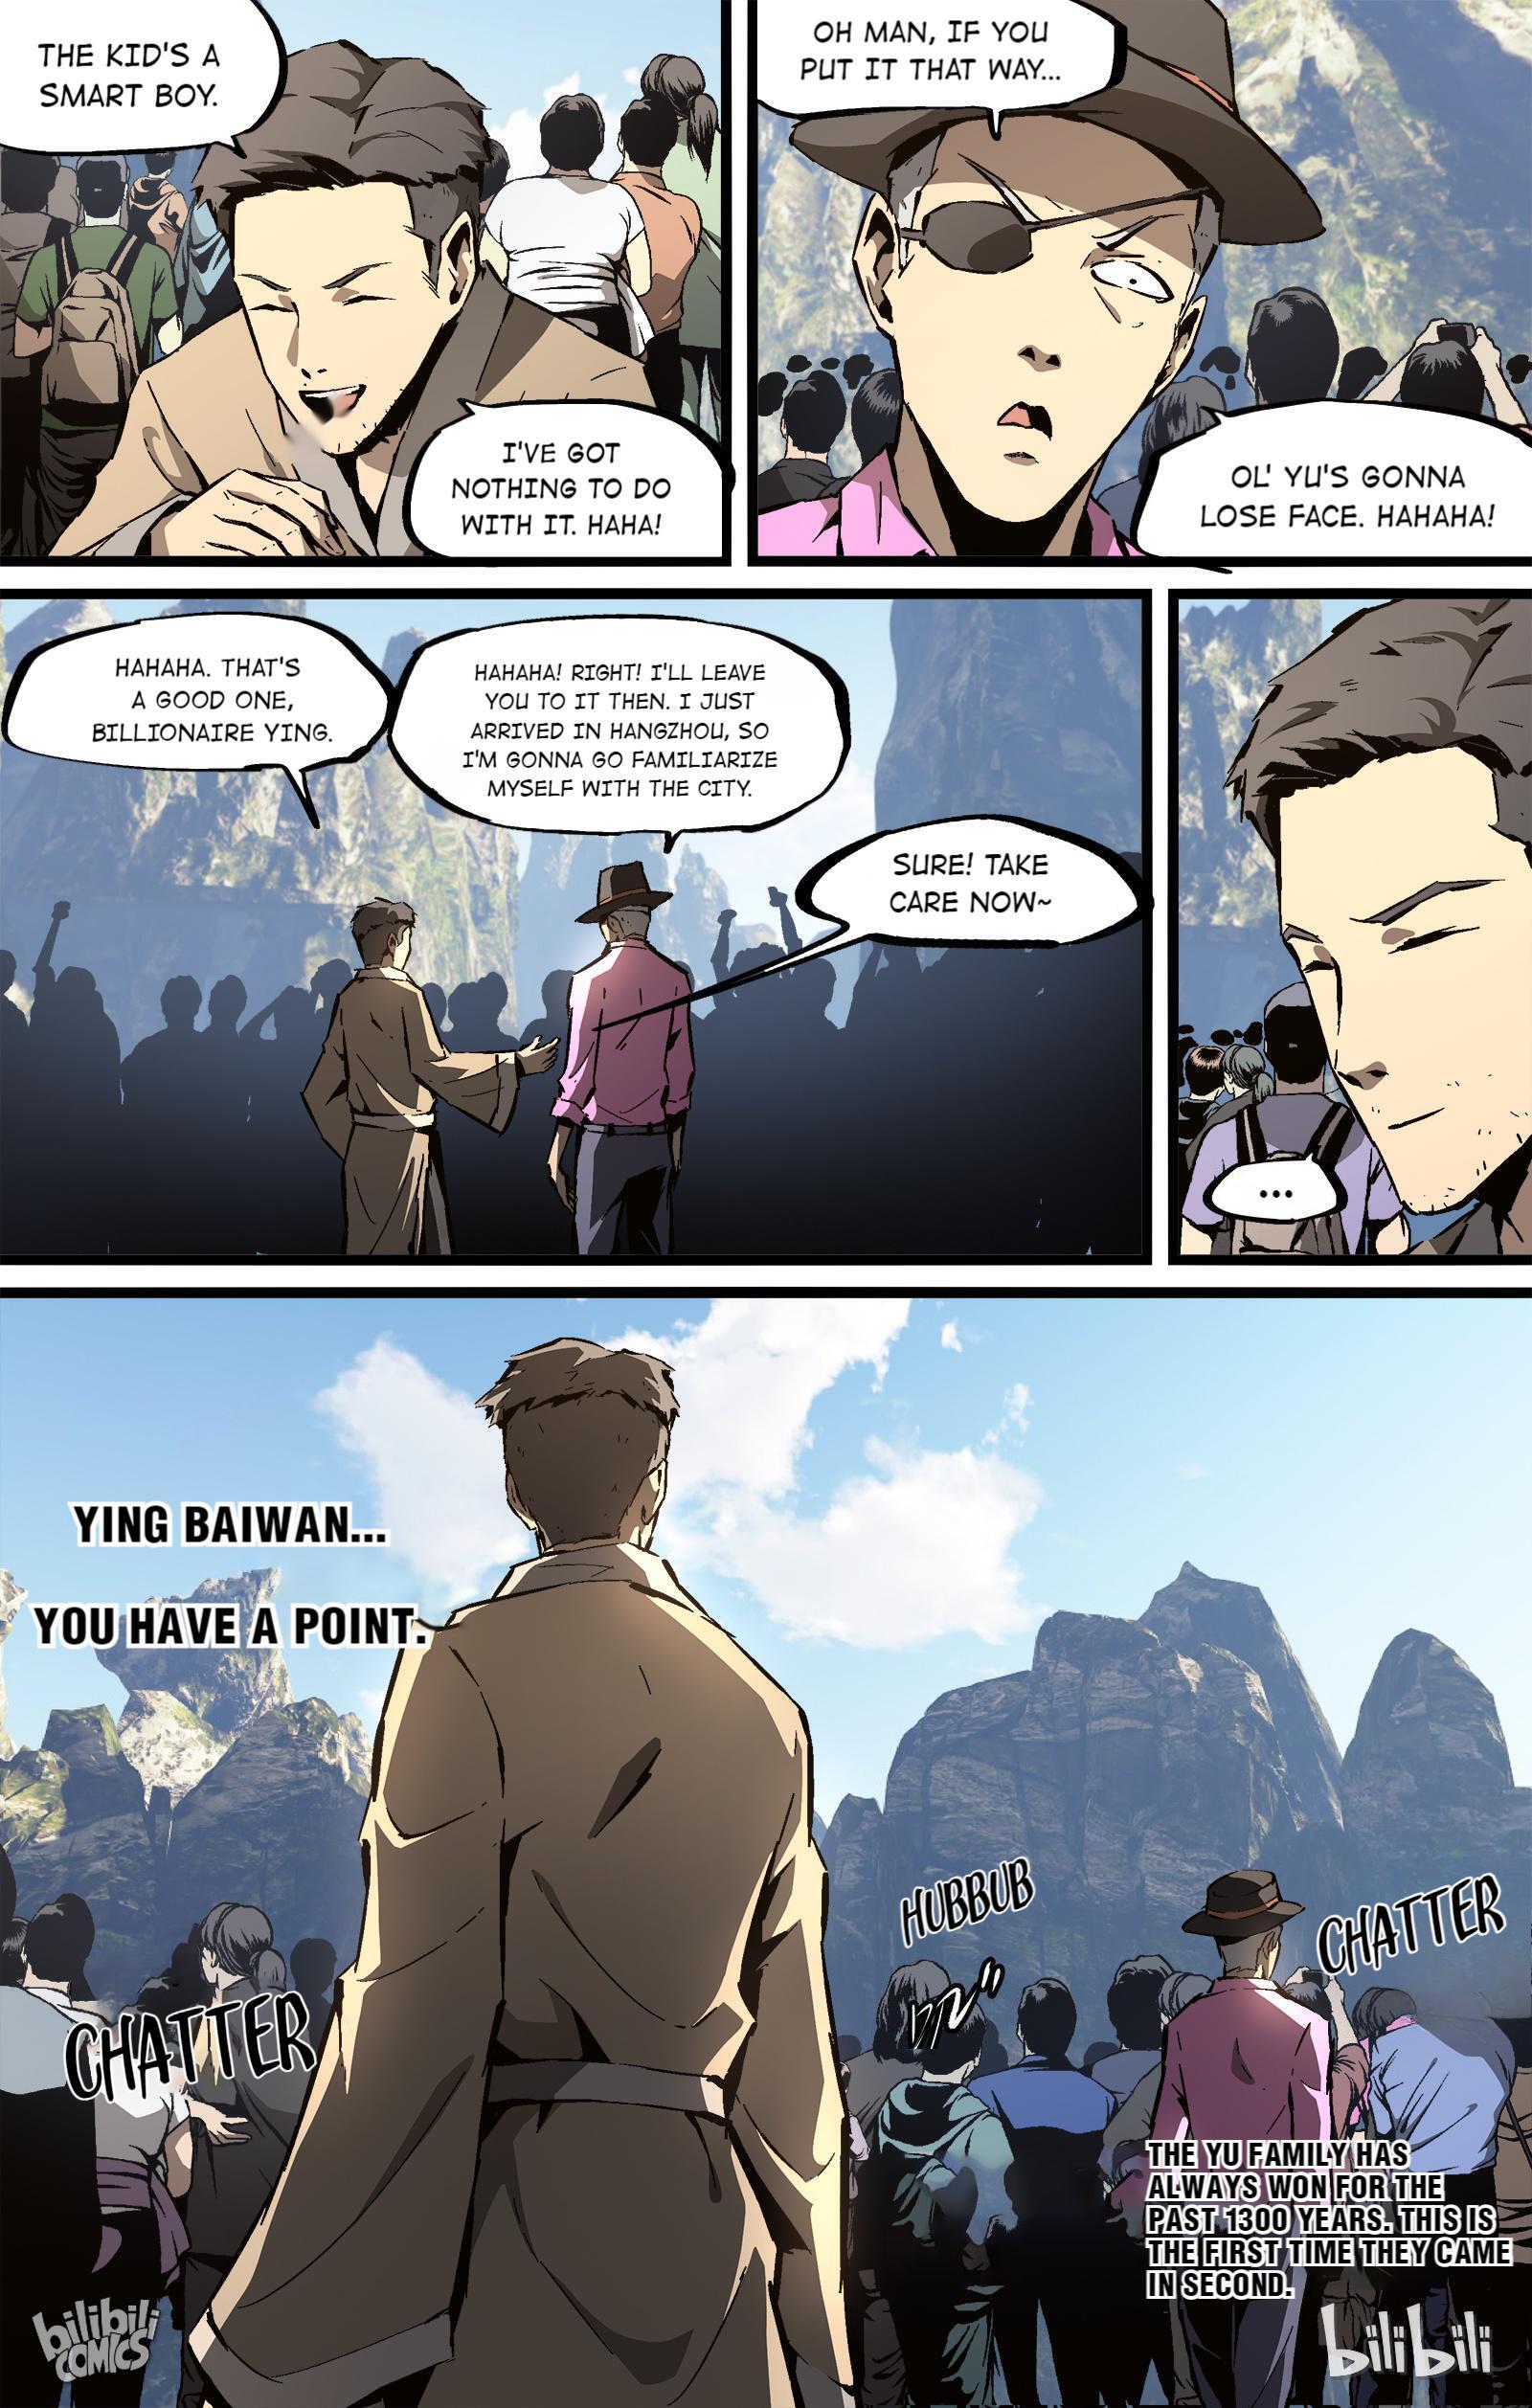 Lawless Zone Chapter 88 - Page 10